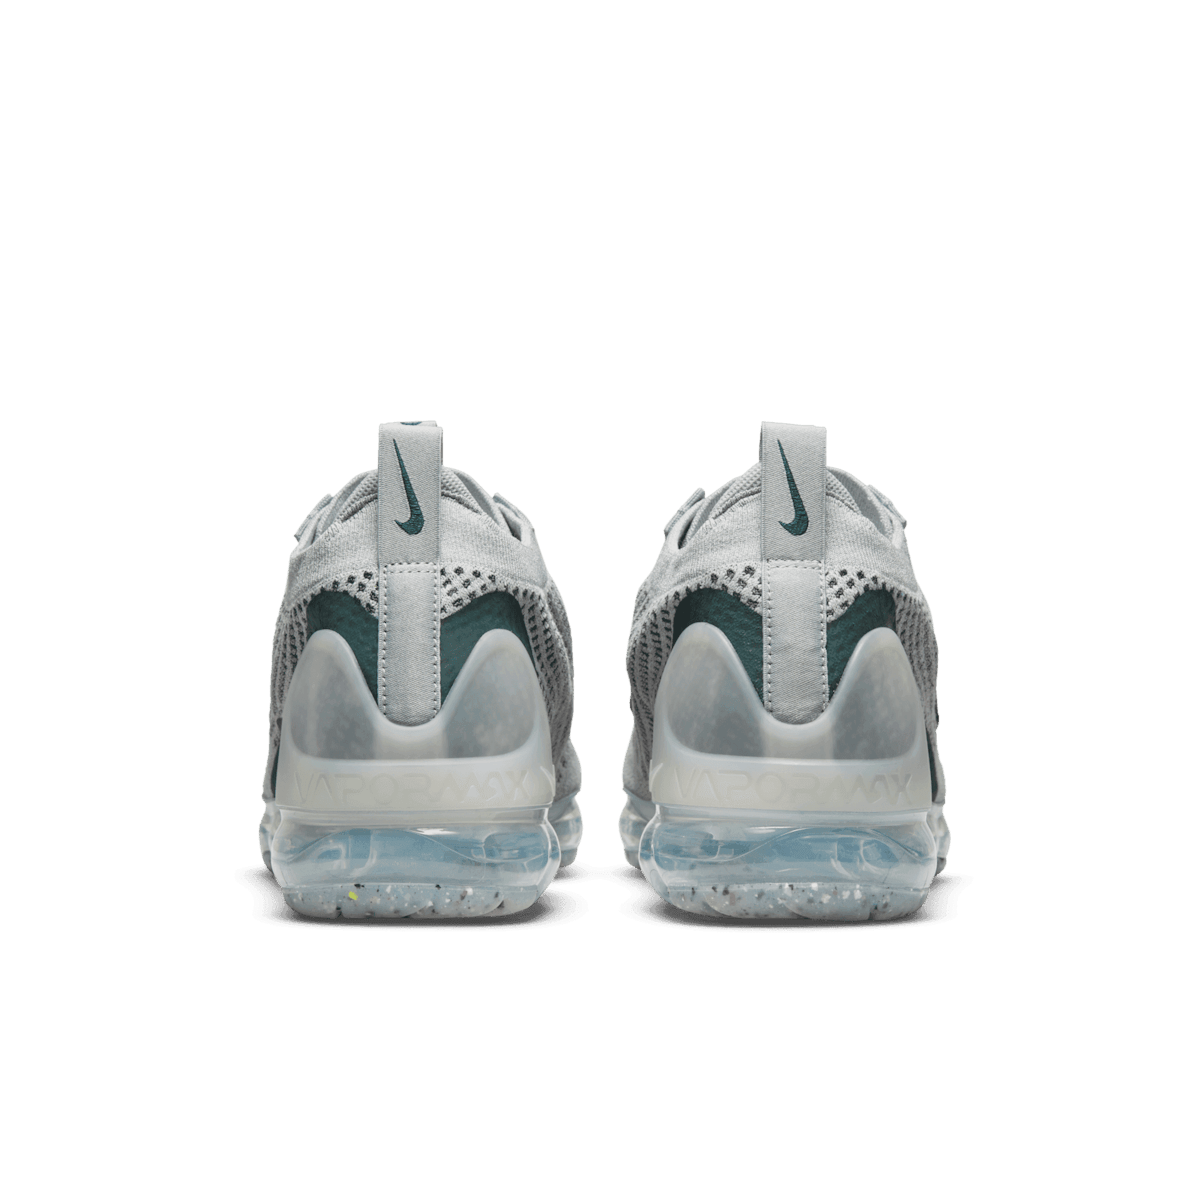 Nike Air VaporMax 2021 FK SE Shoes in Grey Angle 3